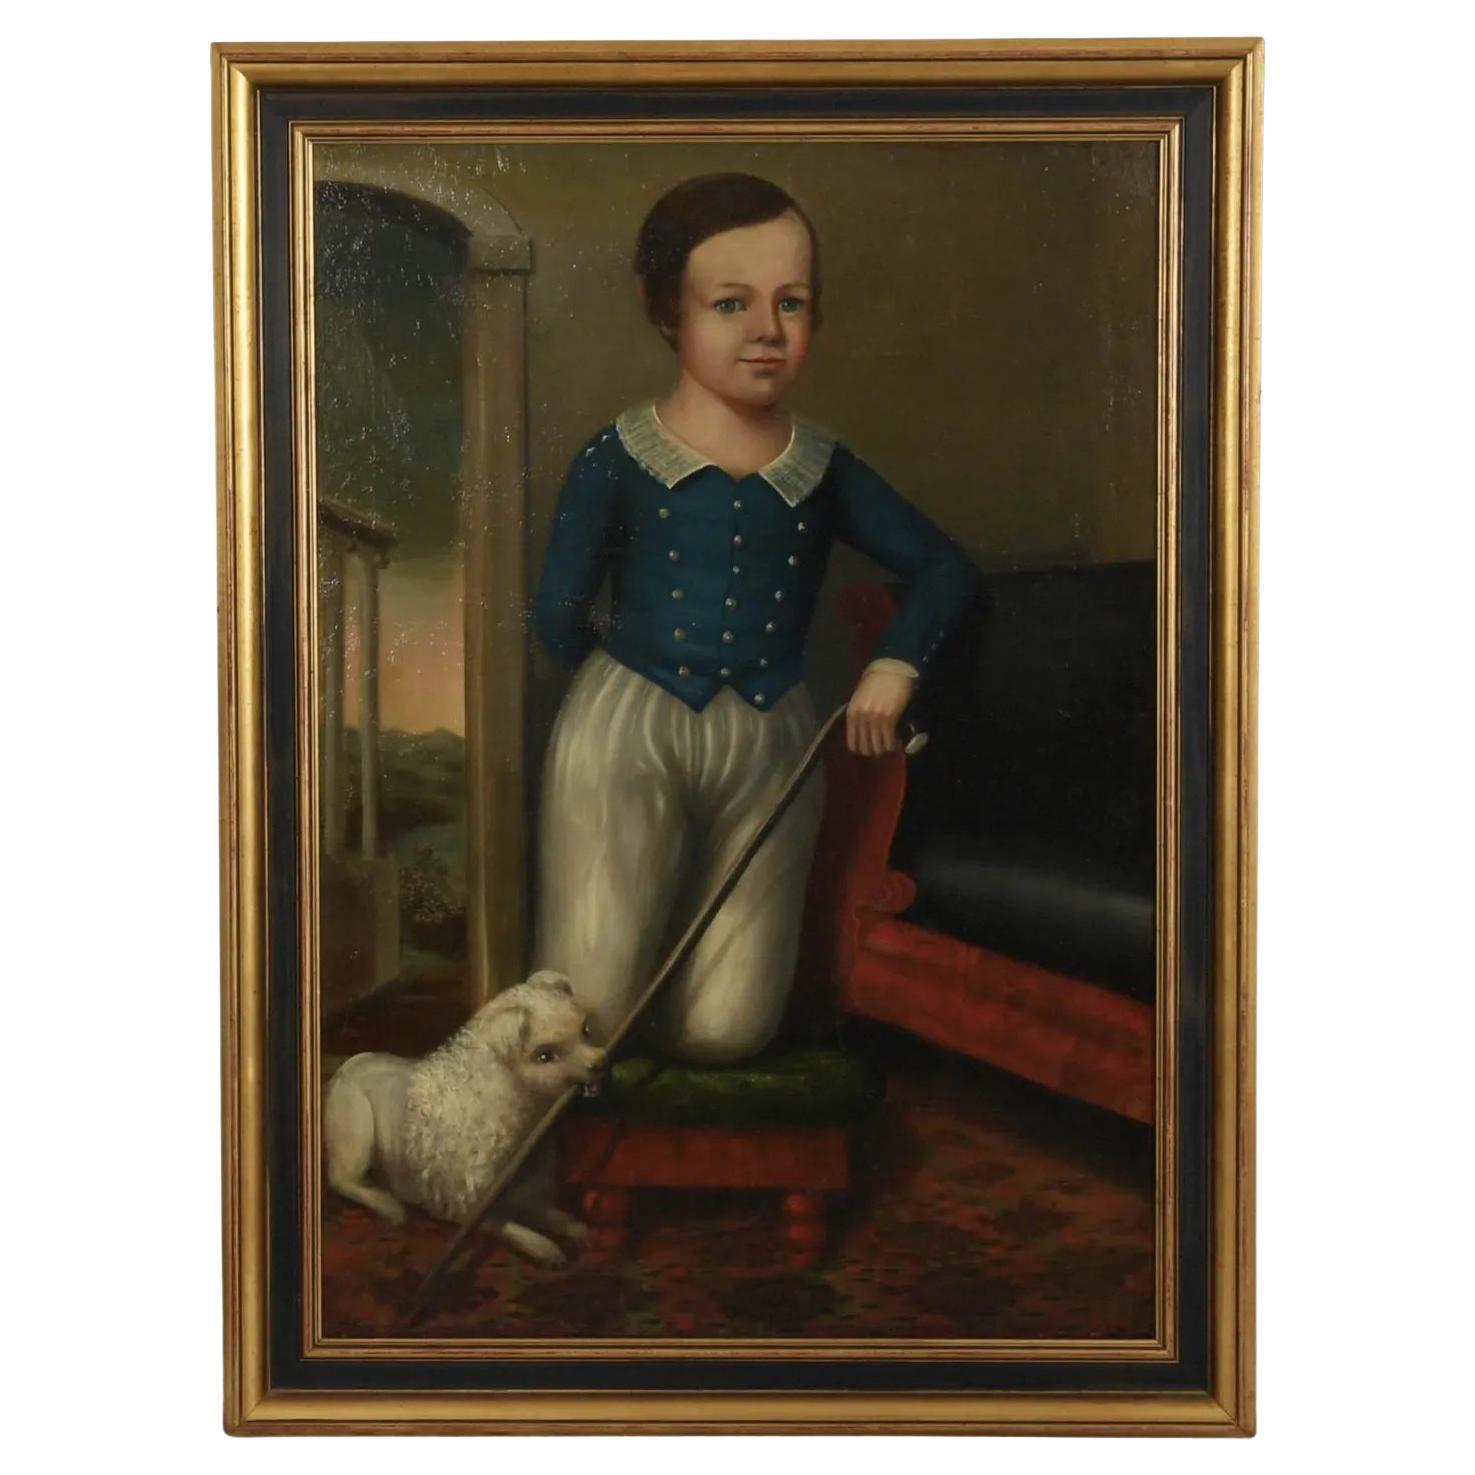 Antique 19c American School Portrait Oil Painting of a Boy & His Dog